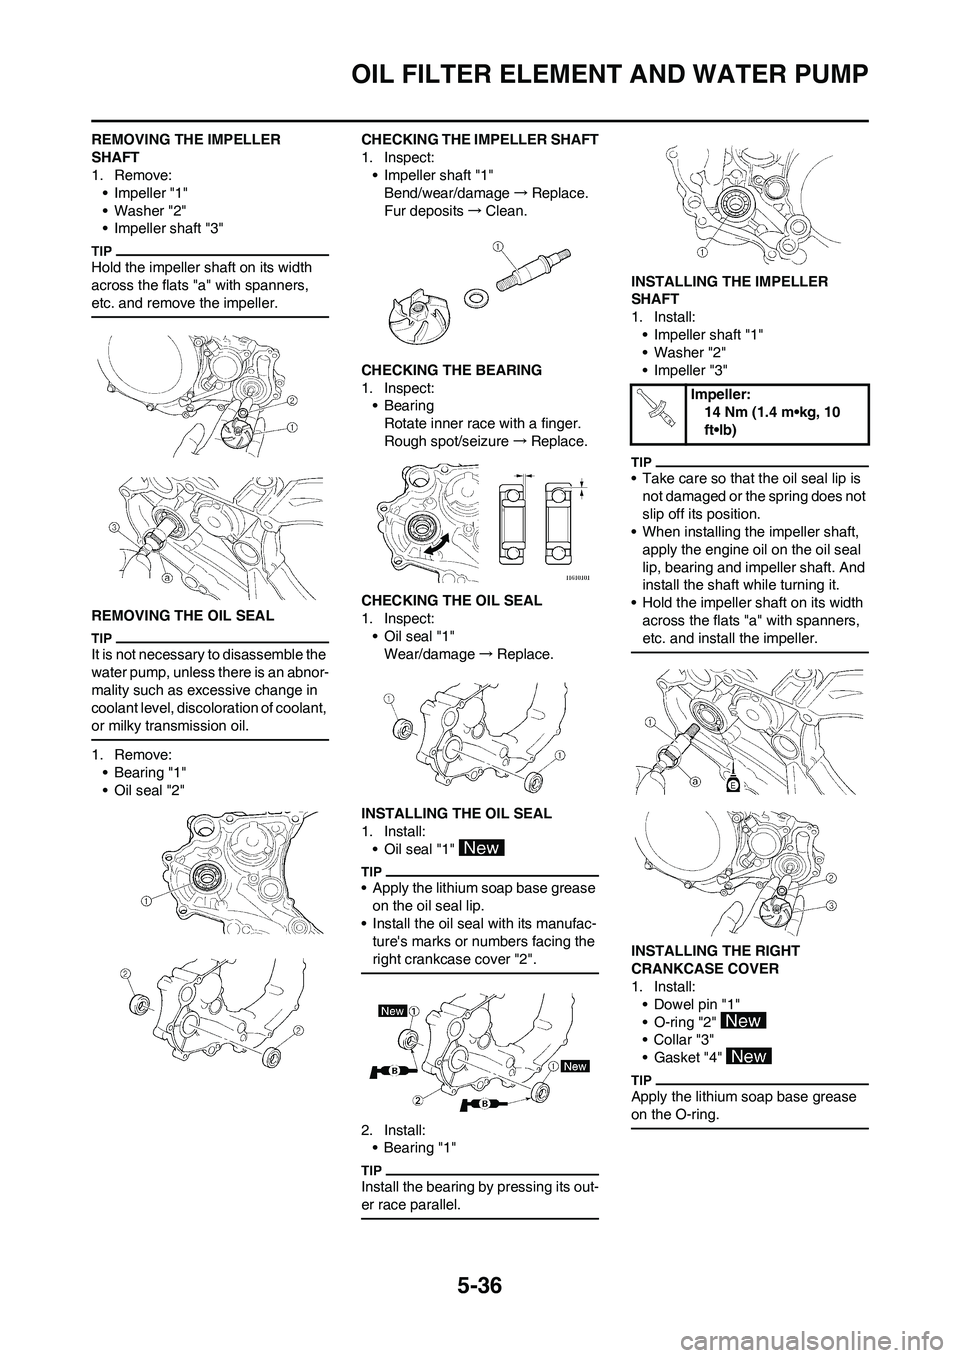 YAMAHA WR 450F 2010  Owners Manual 5-36
OIL FILTER ELEMENT AND WATER PUMP
REMOVING THE IMPELLER 
SHAFT
1. Remove:
• Impeller "1"
• Washer "2"
• Impeller shaft "3"
Hold the impeller shaft on its width 
across the flats "a" with sp